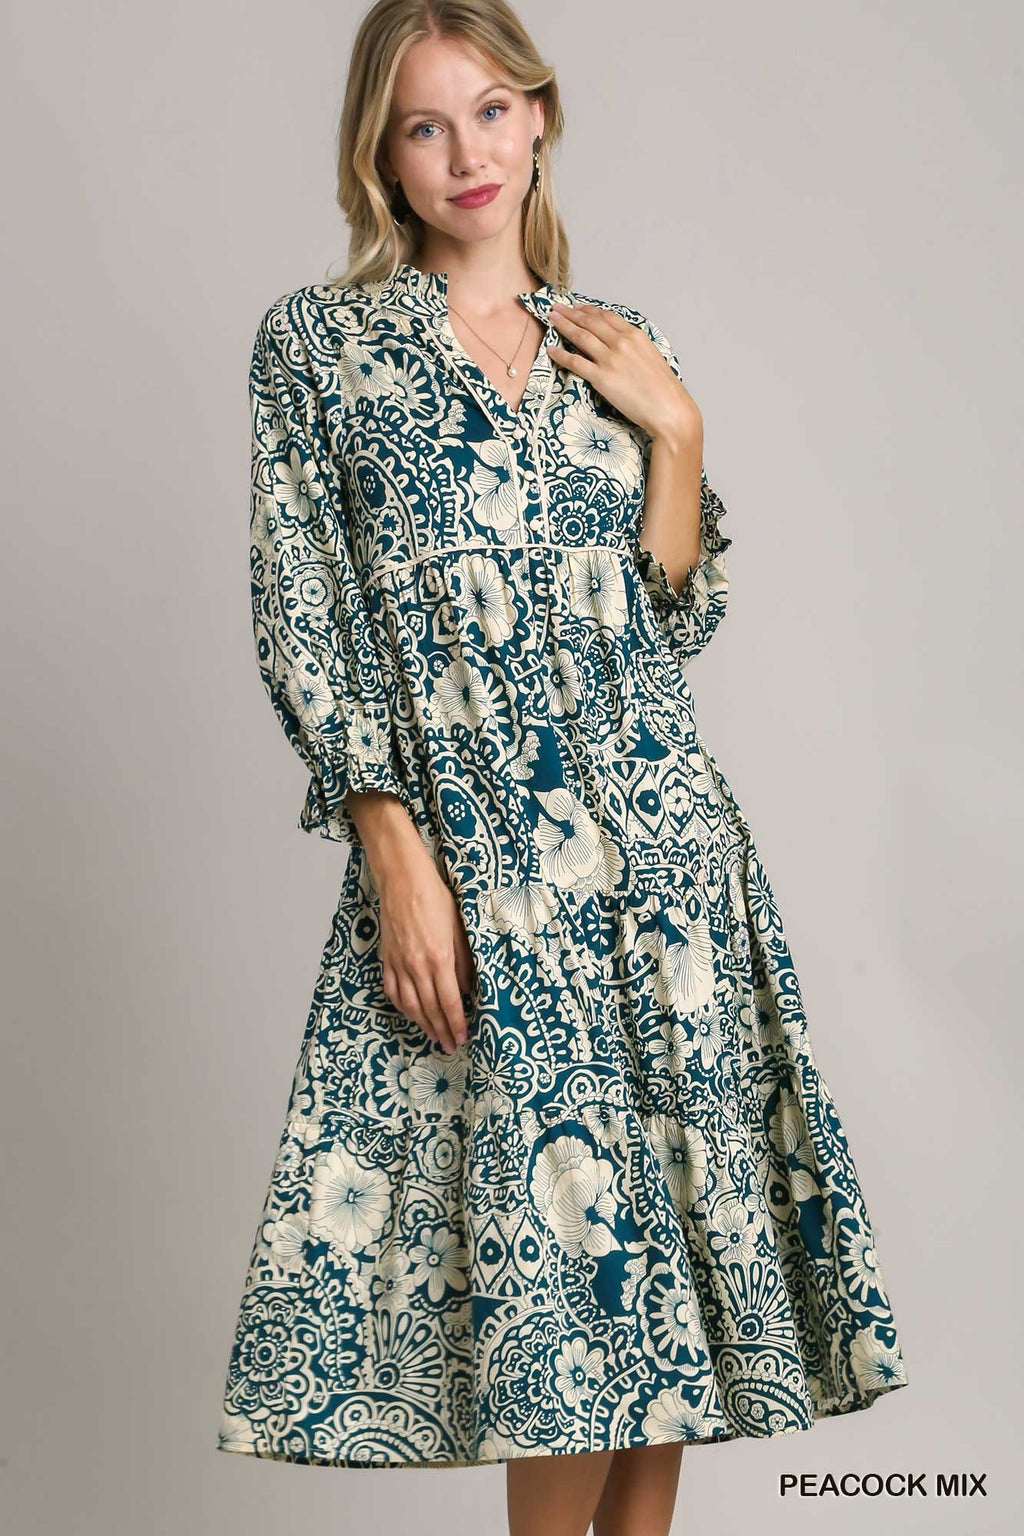 Umgee Peacock Mixed Print Dress with 3/4 Sleeves, Tiered Midi Dress with Piping